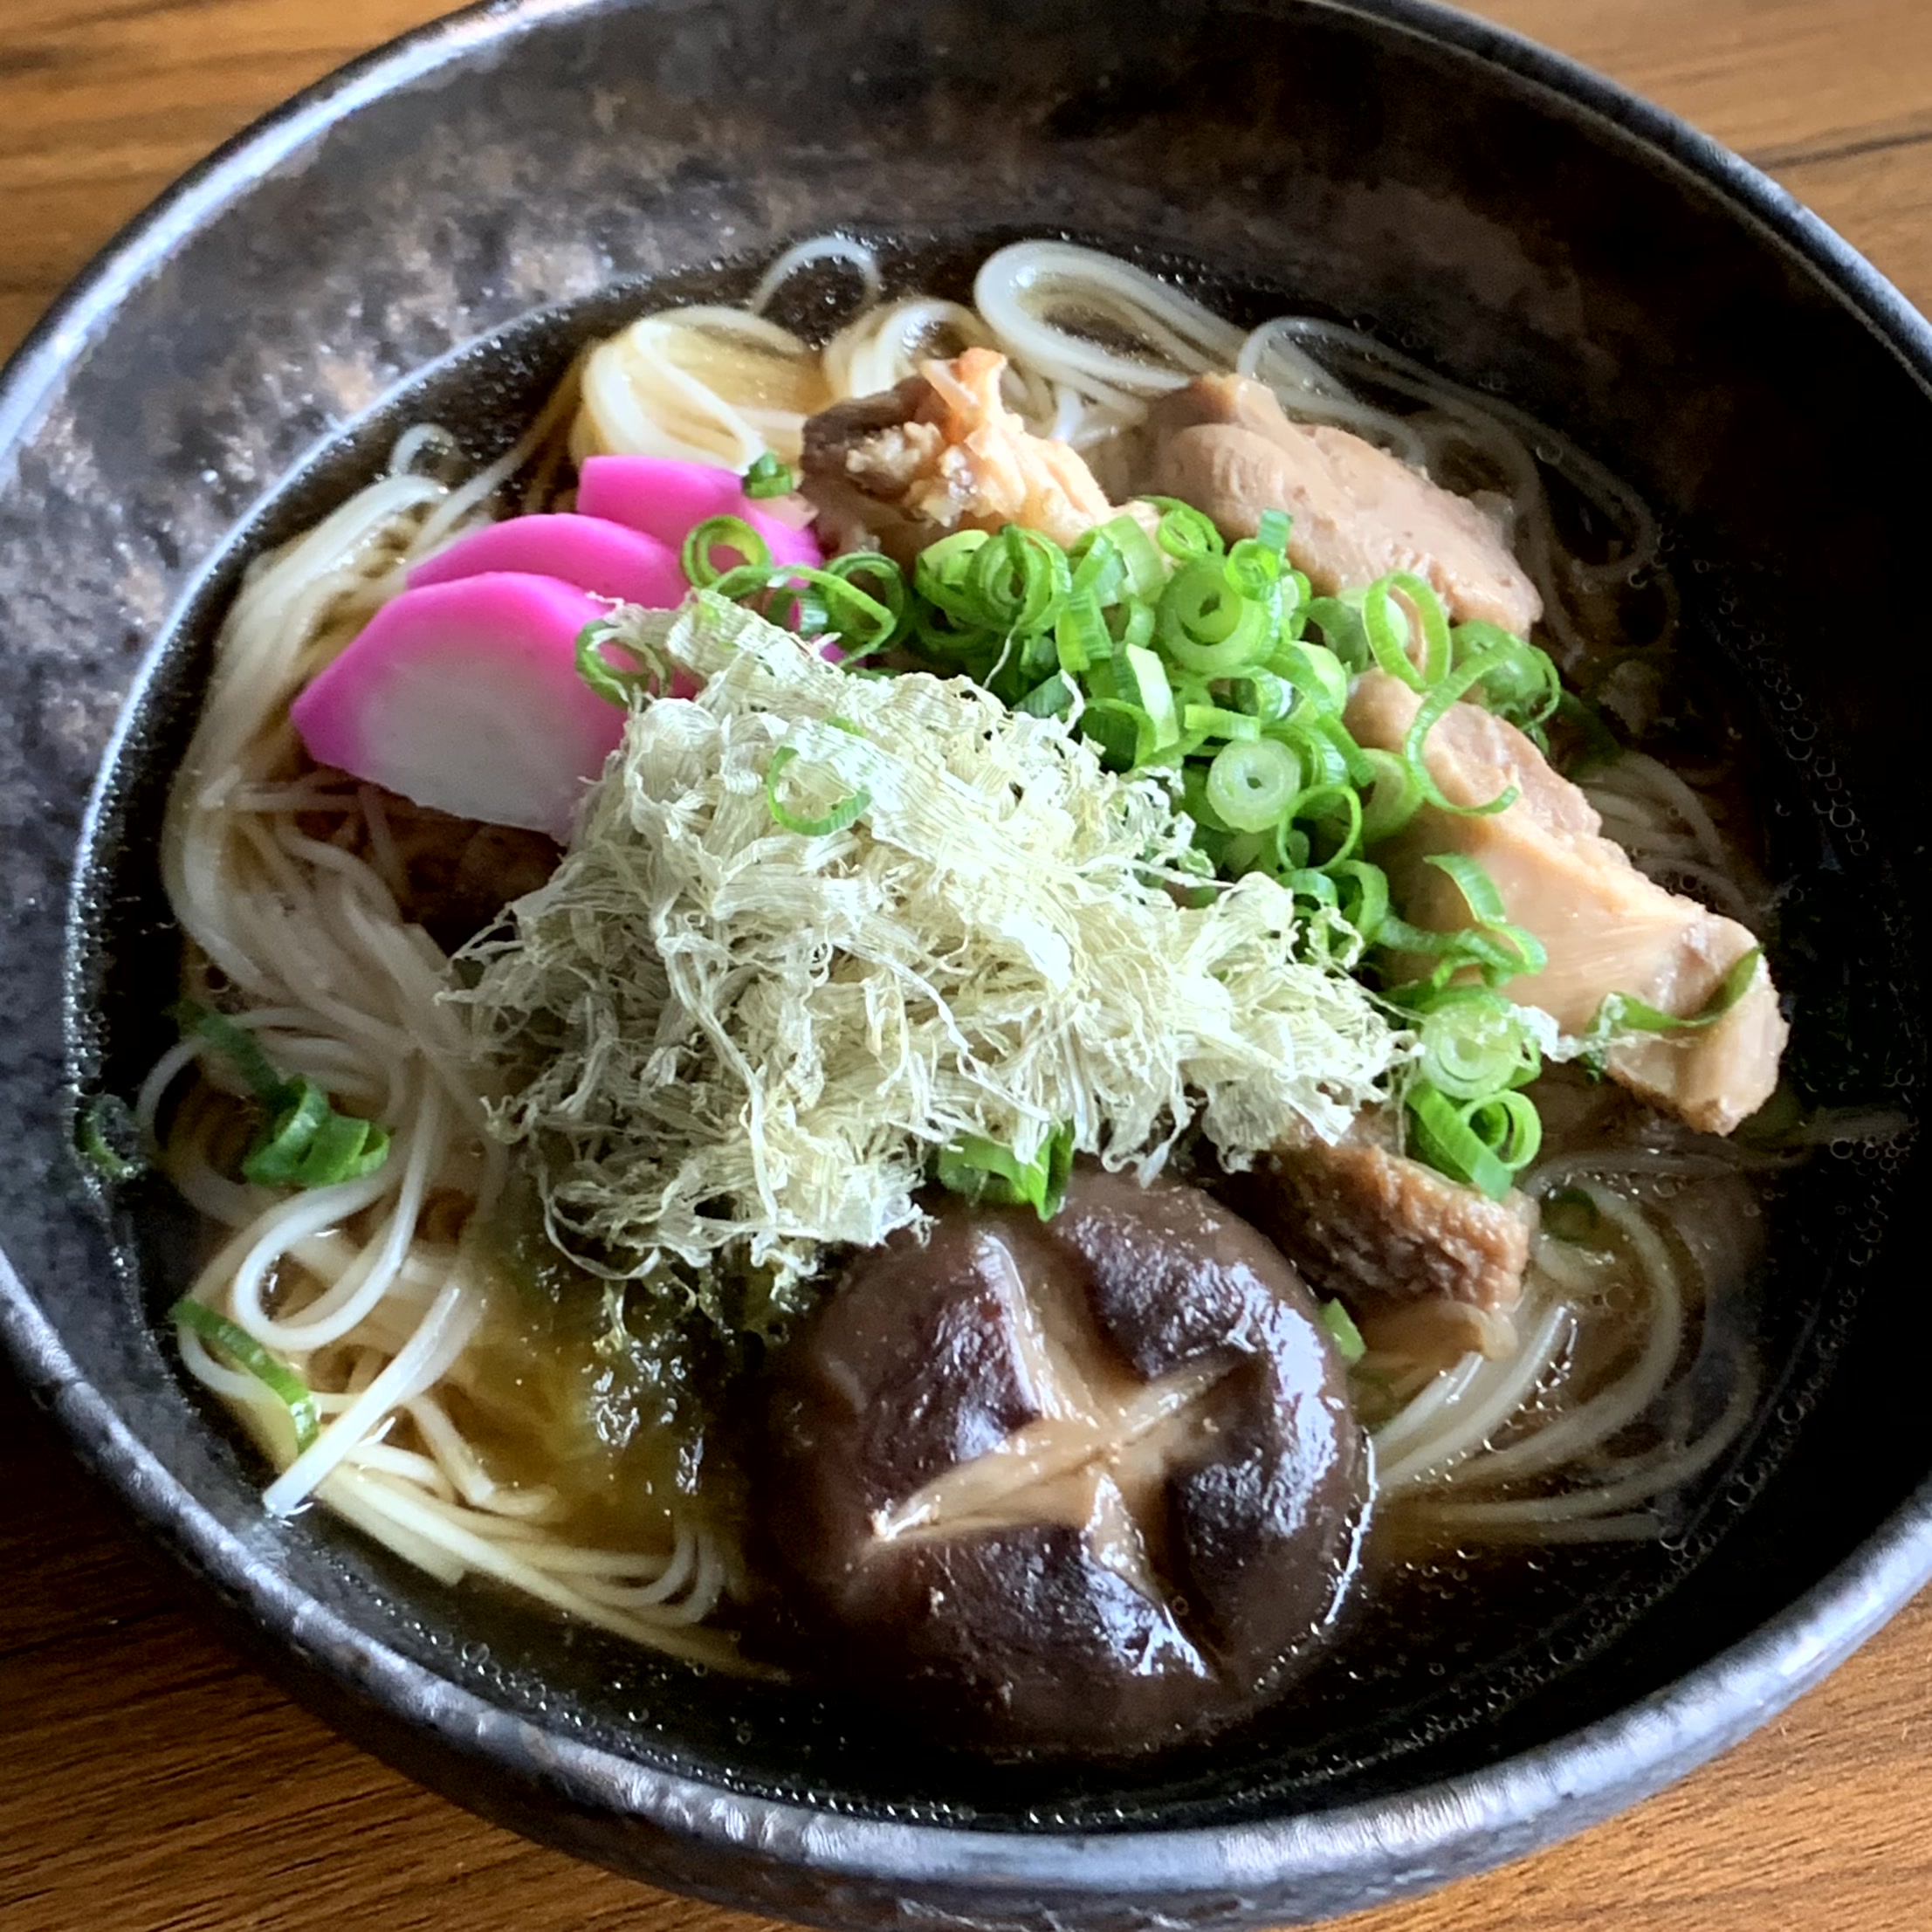 A dish of somen noodles in a warm soup rich in the flavor of shiitake mushrooms.